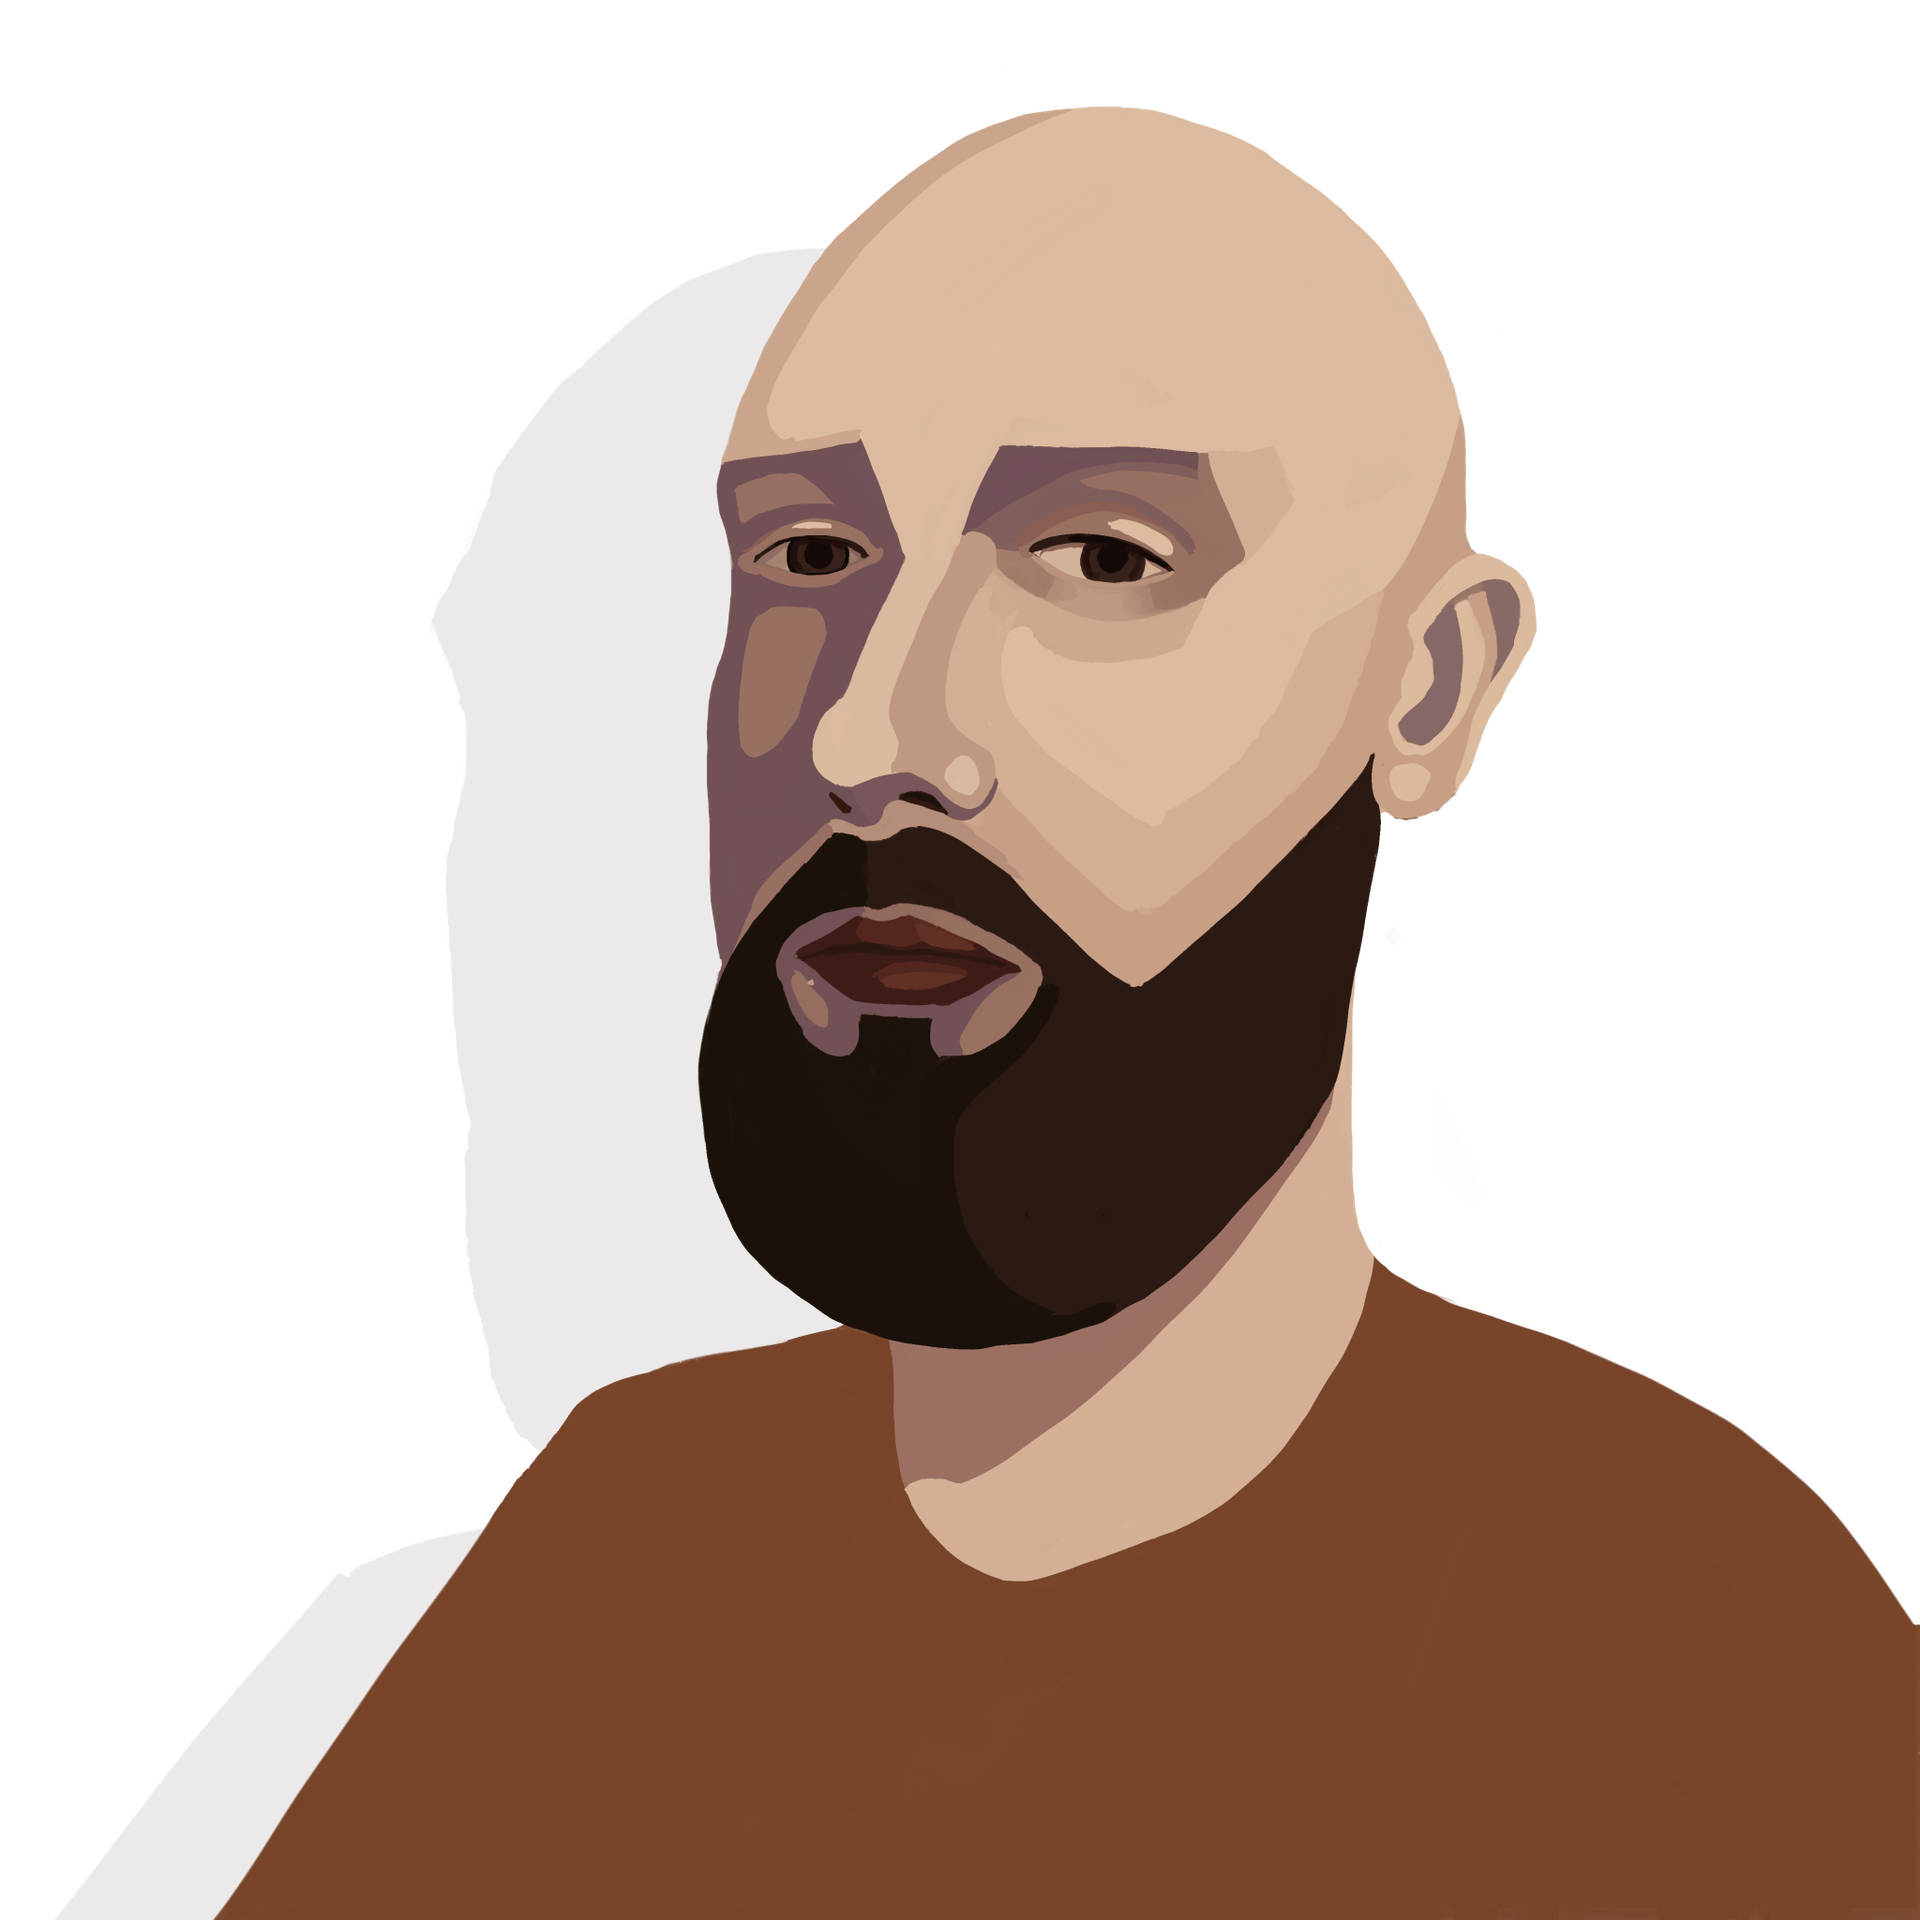 Paolo's profile image in illustration style